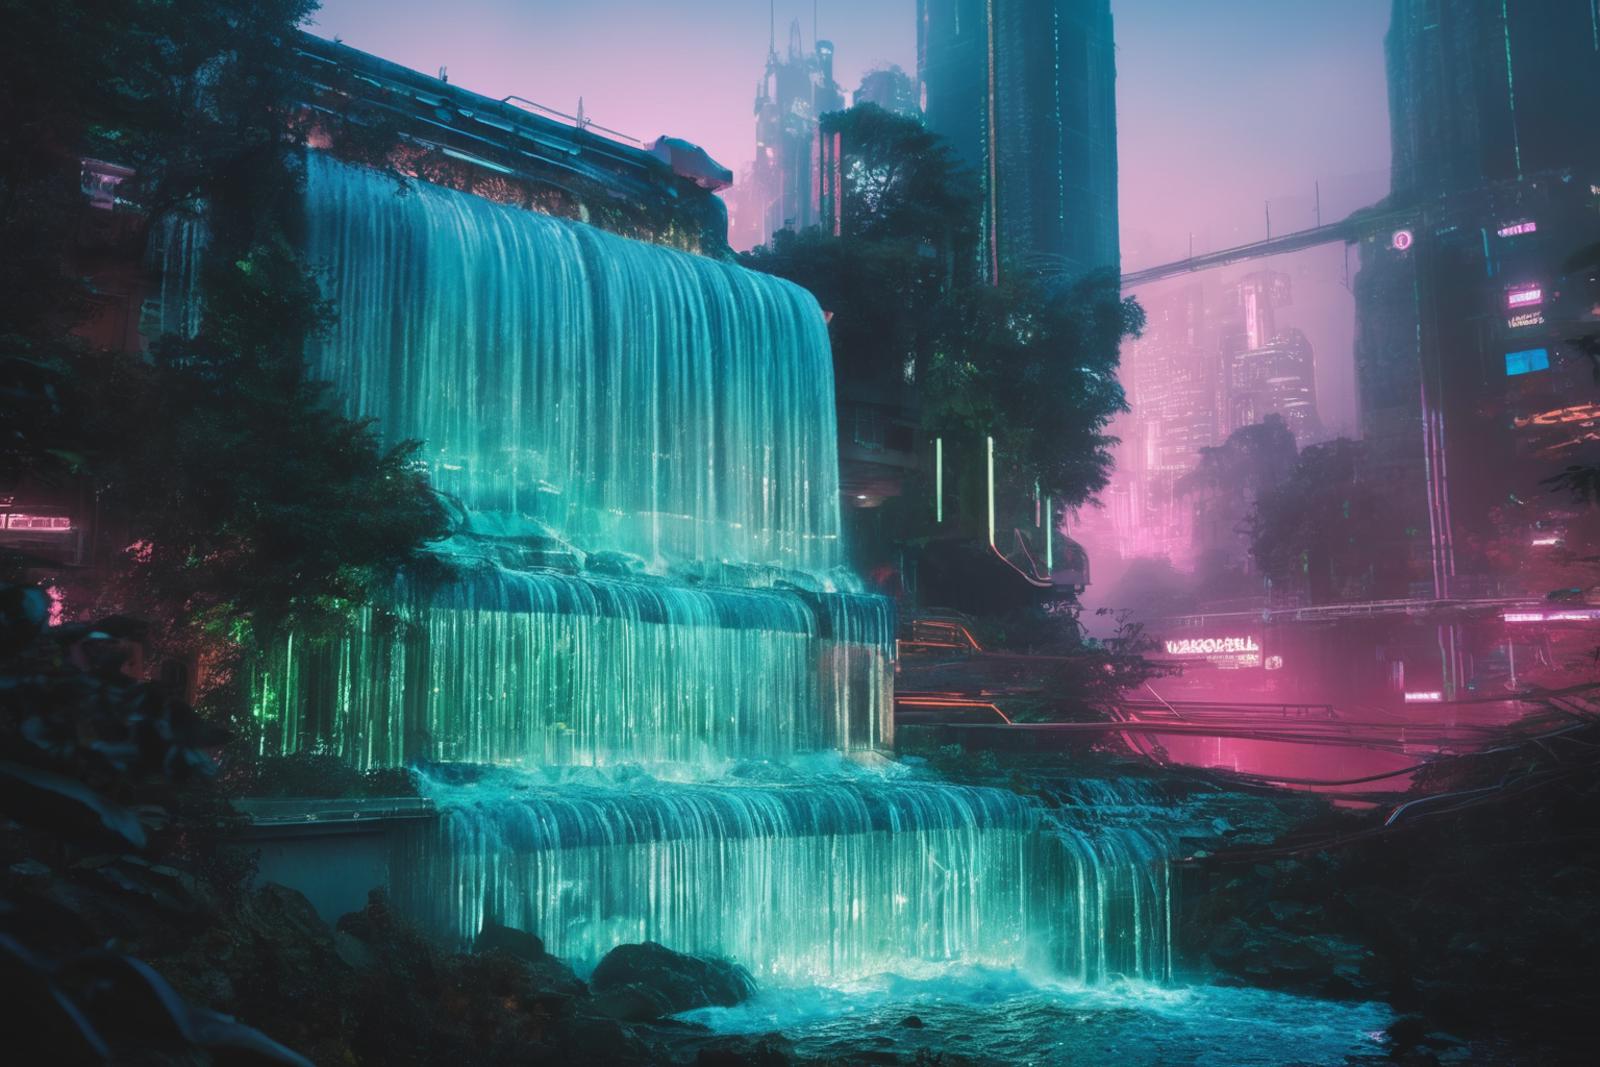 A waterfall with a large city in the background at night